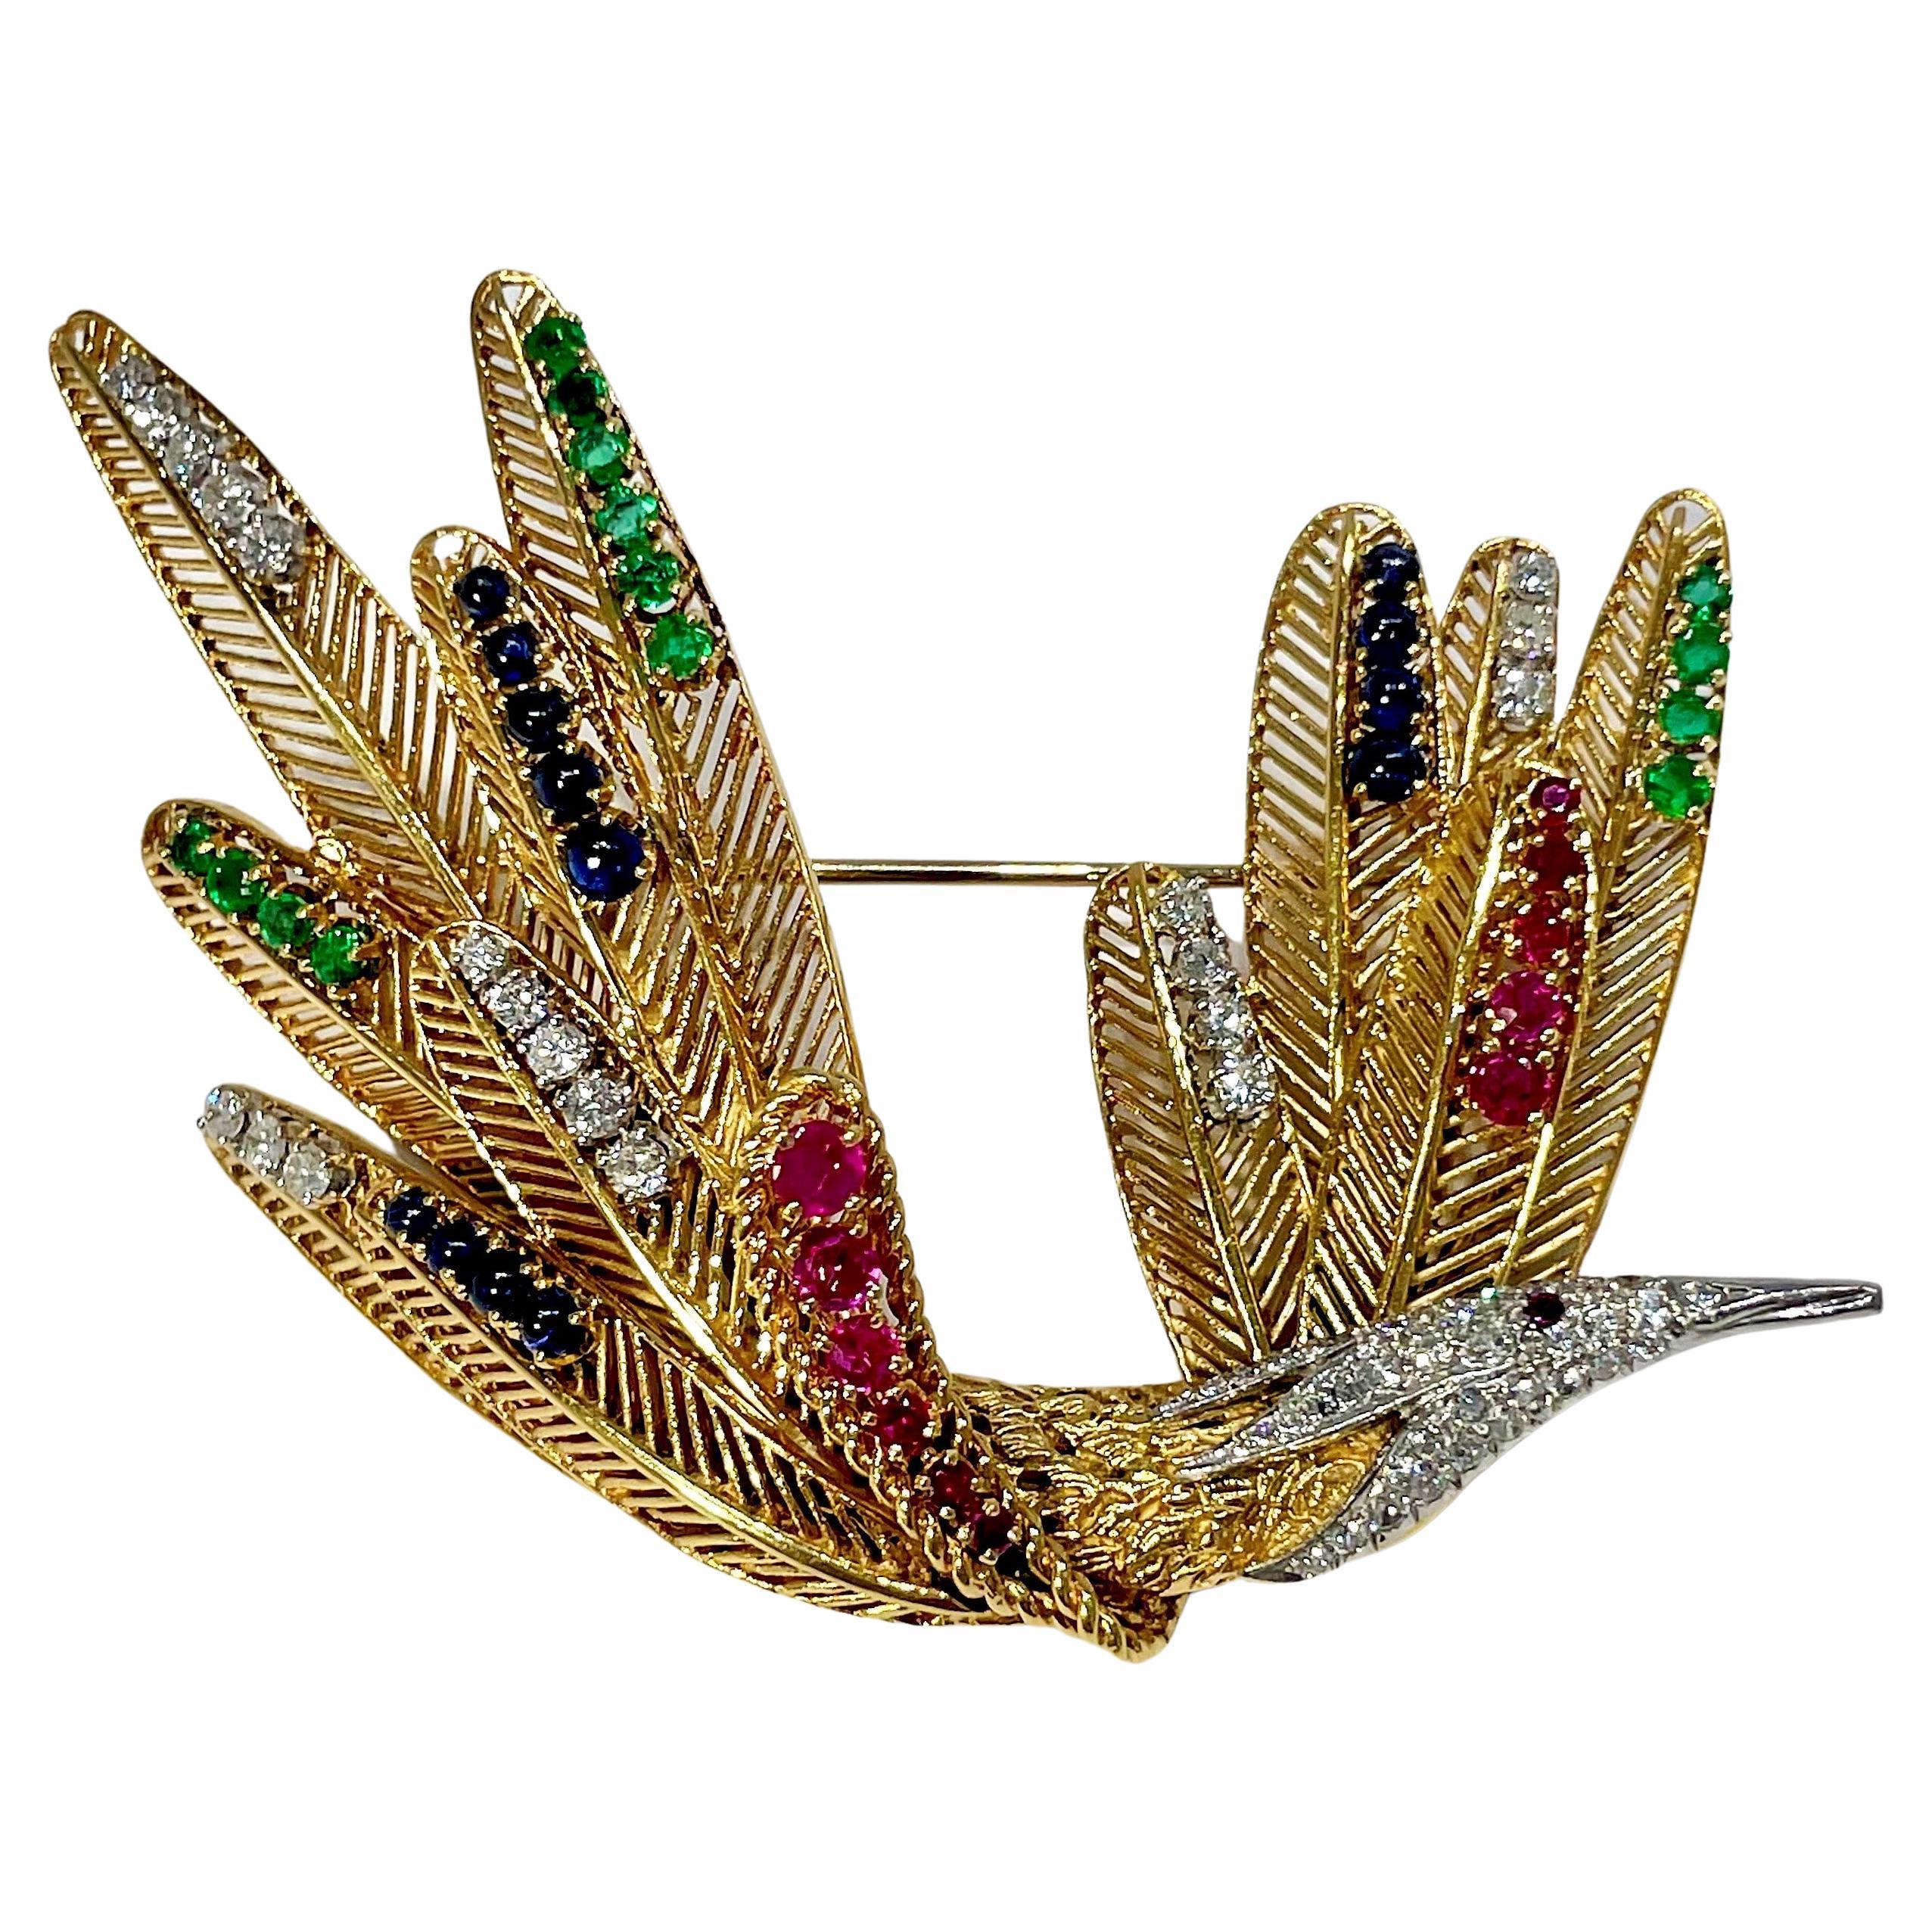 18k Gold "Bird in Flight" Brooch with Diamonds, Rubies, Emeralds and Sapphires